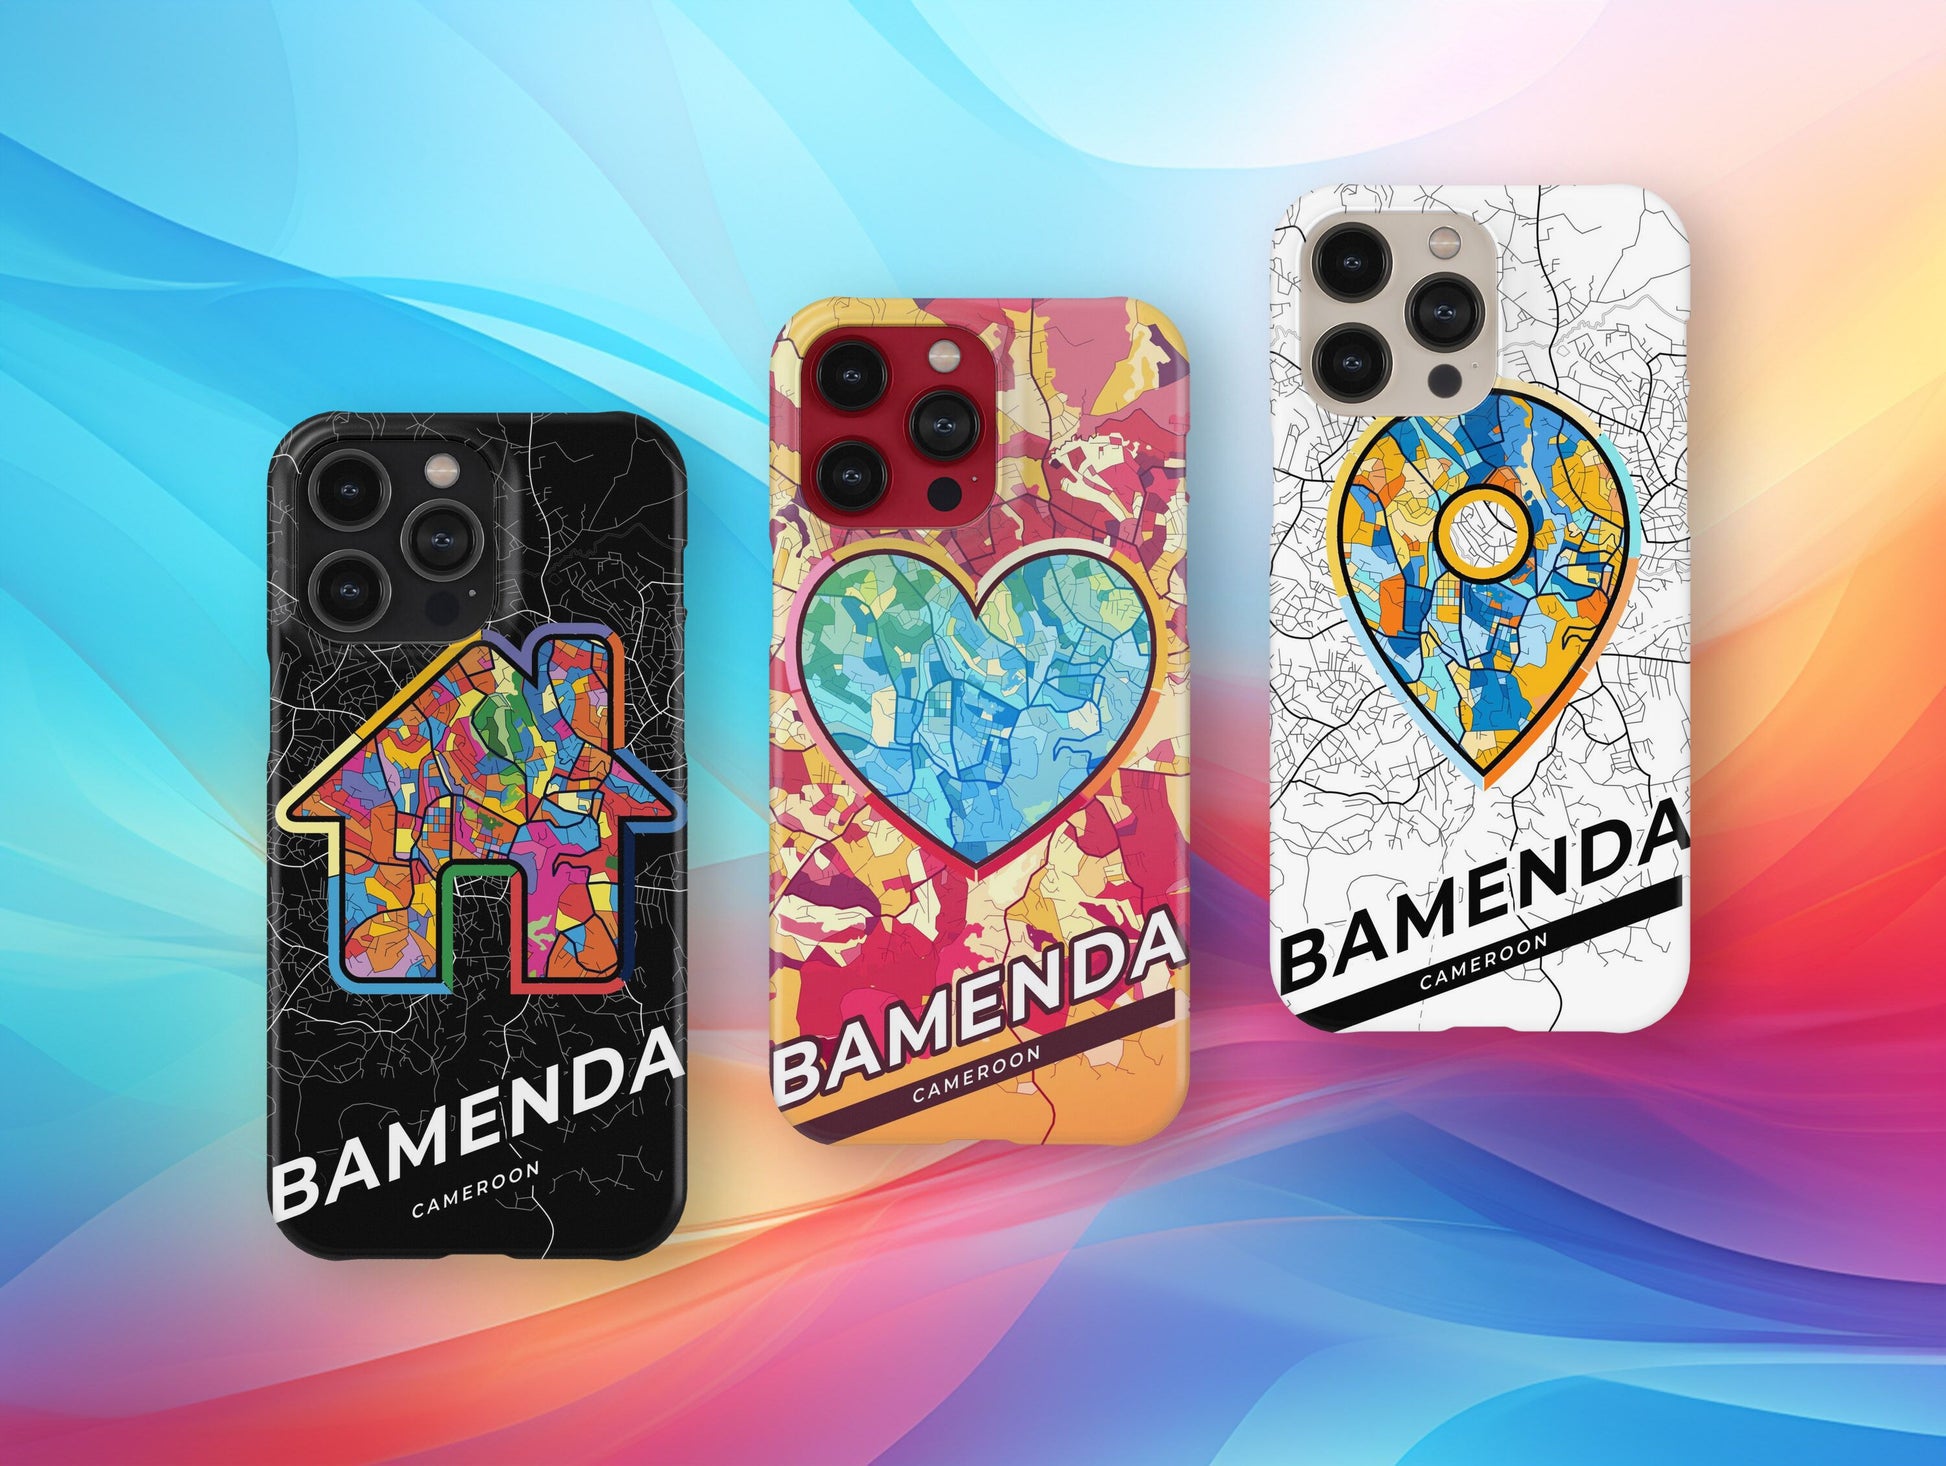 Bamenda Cameroon slim phone case with colorful icon. Birthday, wedding or housewarming gift. Couple match cases.